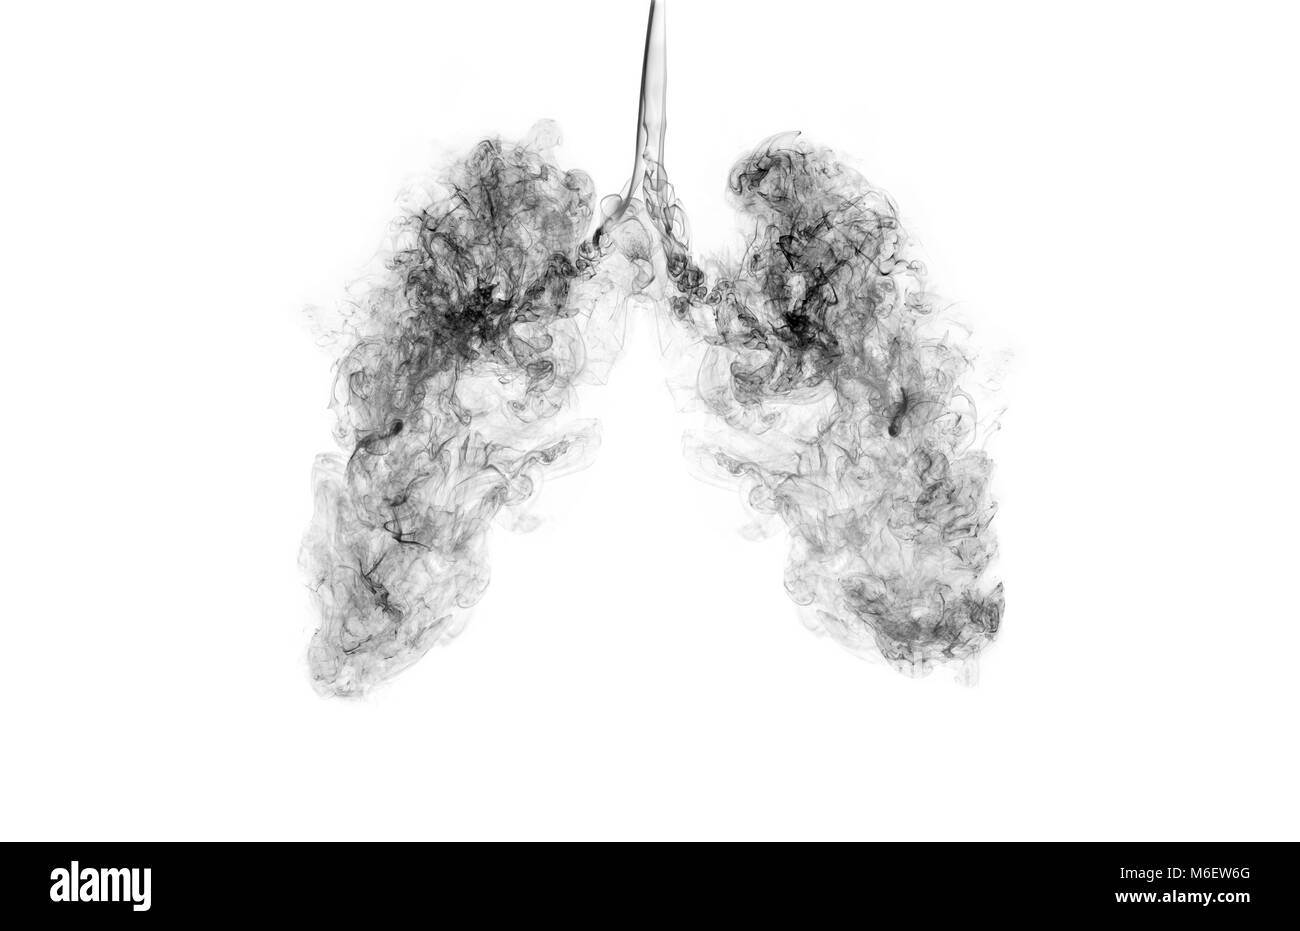 A concept image when smoke goes inside the lungs. Campaign for quitting smoking or living in a polluted area. Stock Photo